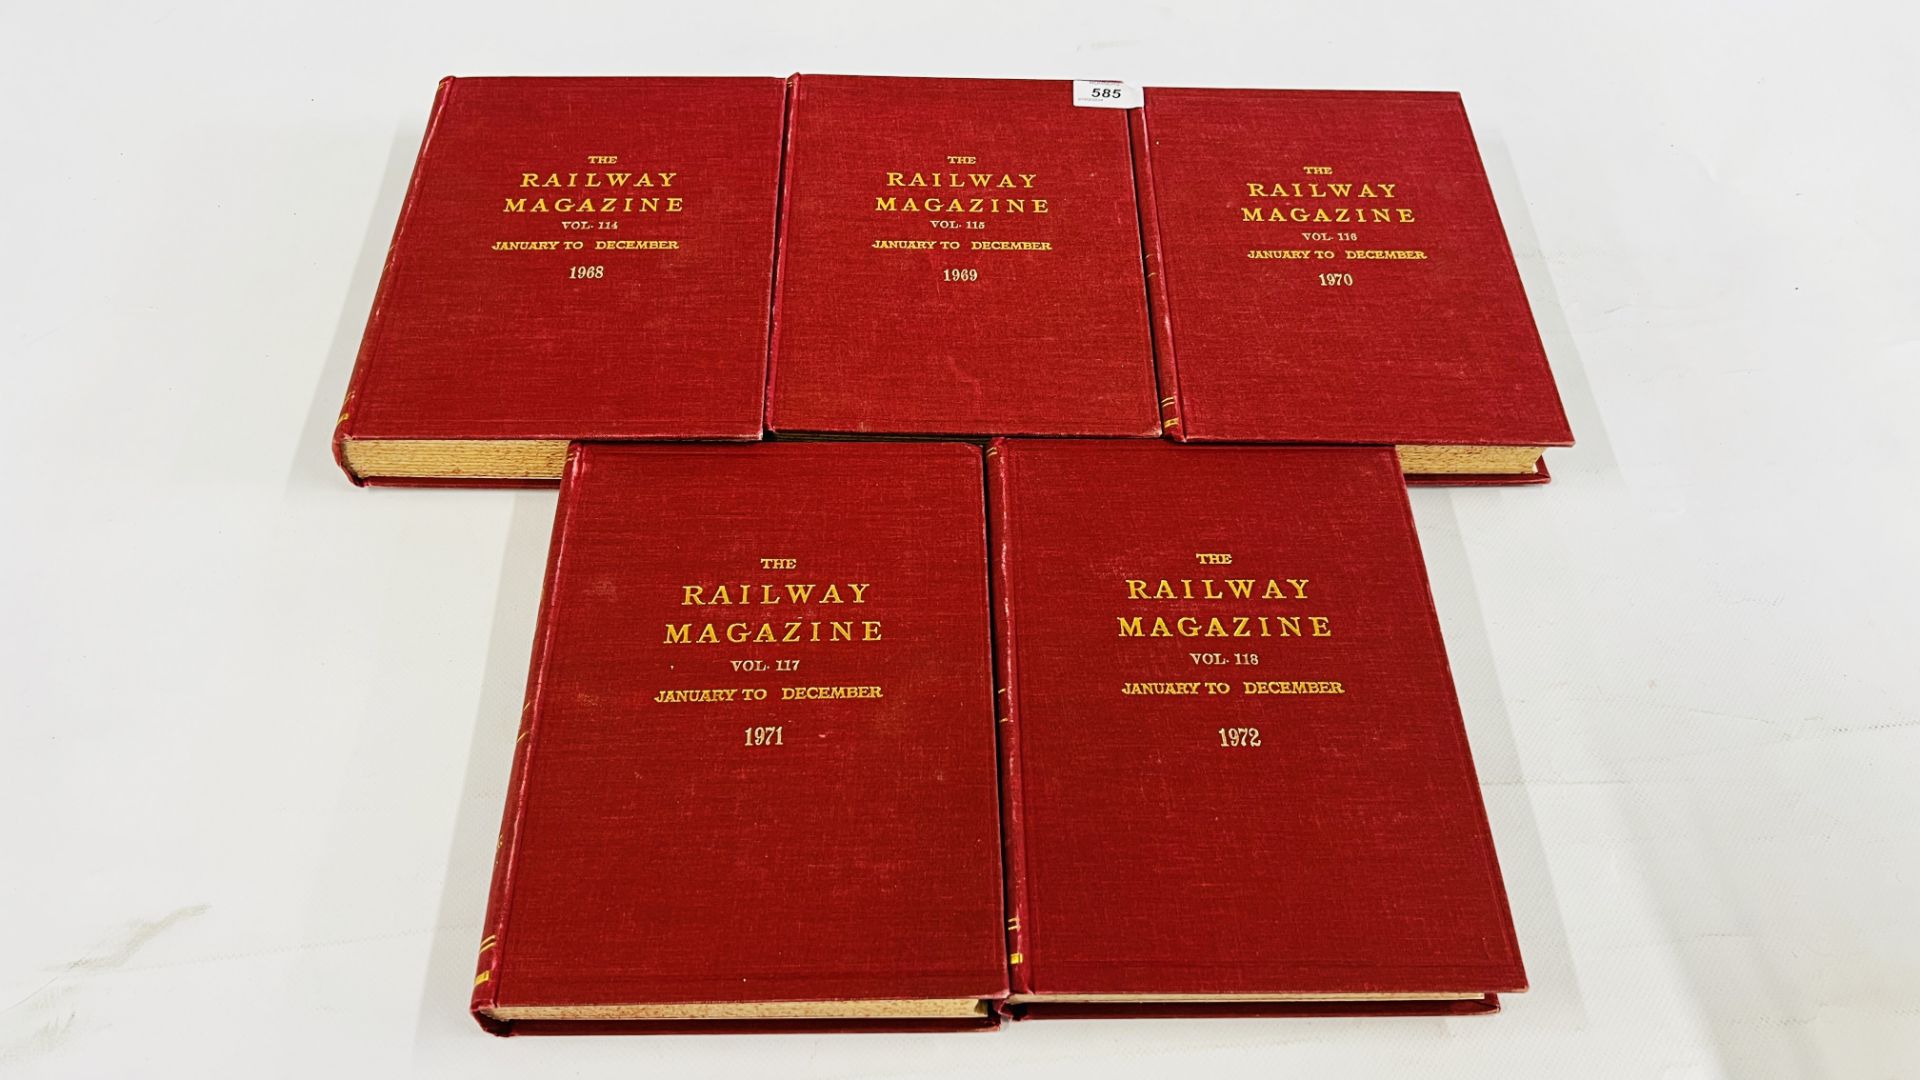 FIVE VOLUMES OF "THE RAILWAY MAGAZINE" FROM 1968-1972.